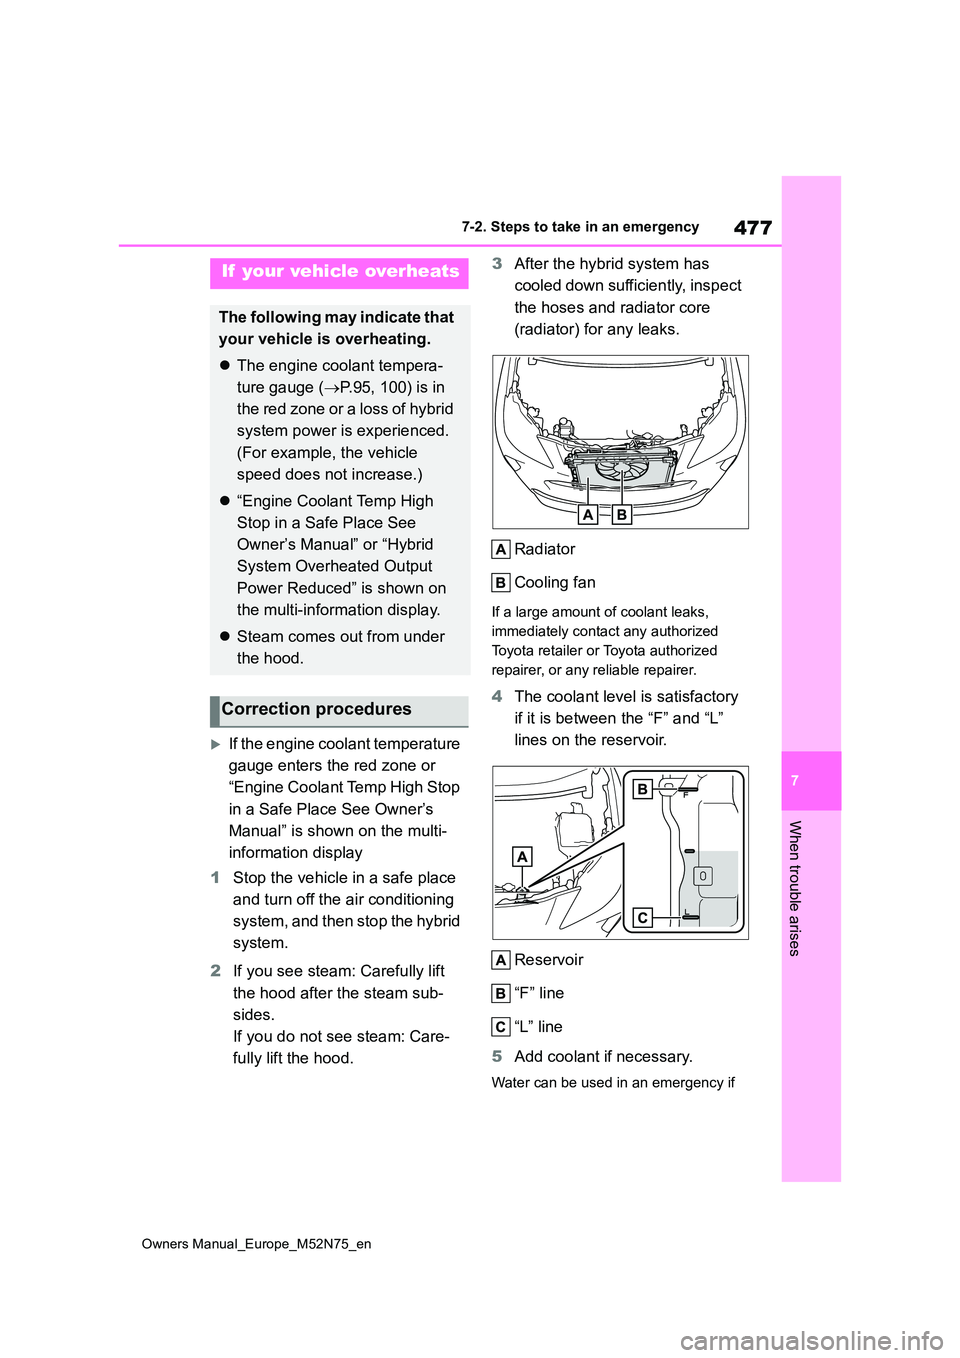 TOYOTA YARIS CROSS 2023  Owners Manual 477
7
Owners Manual_Europe_M52N75_en
7-2. Steps to take in an emergency
When trouble arises
If the engine coolant temperature  
gauge enters the red zone or  
“Engine Coolant Temp High Stop  
in 